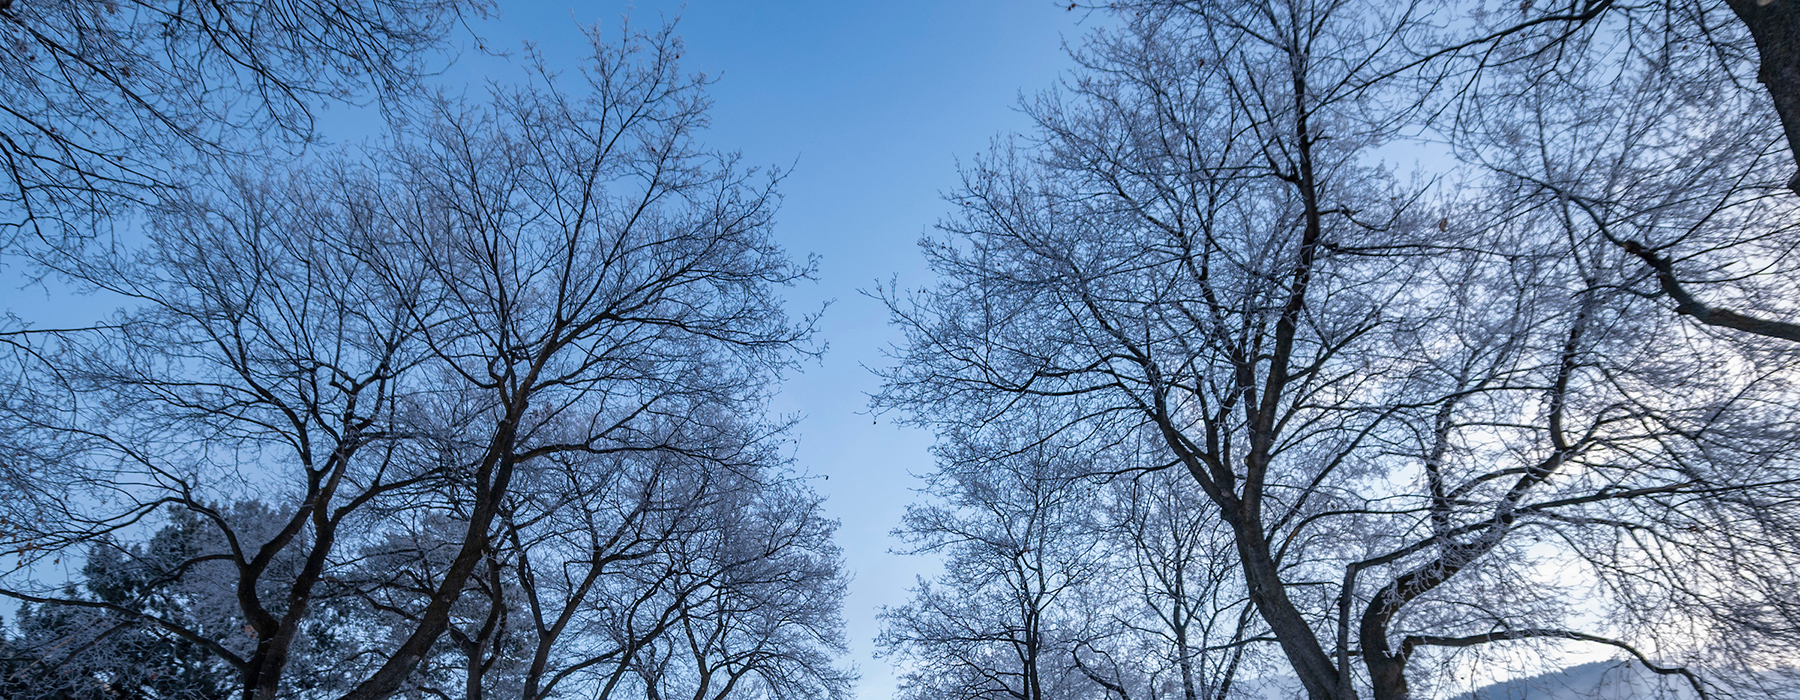 Trees without leaves stretch their branches into the blue sky above